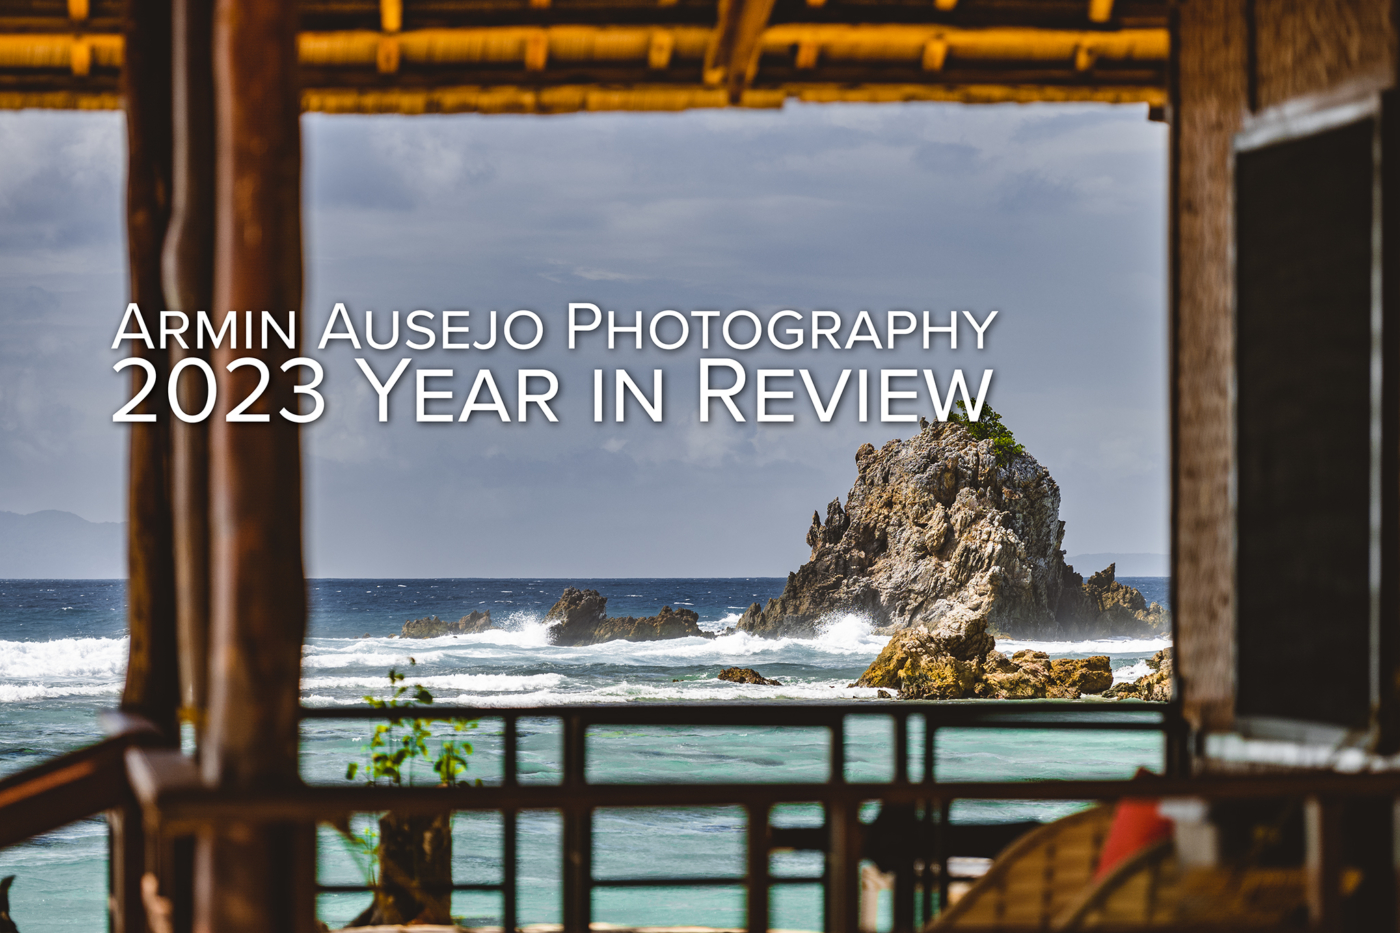 Armin Ausejo Photography 2023 Year in Review